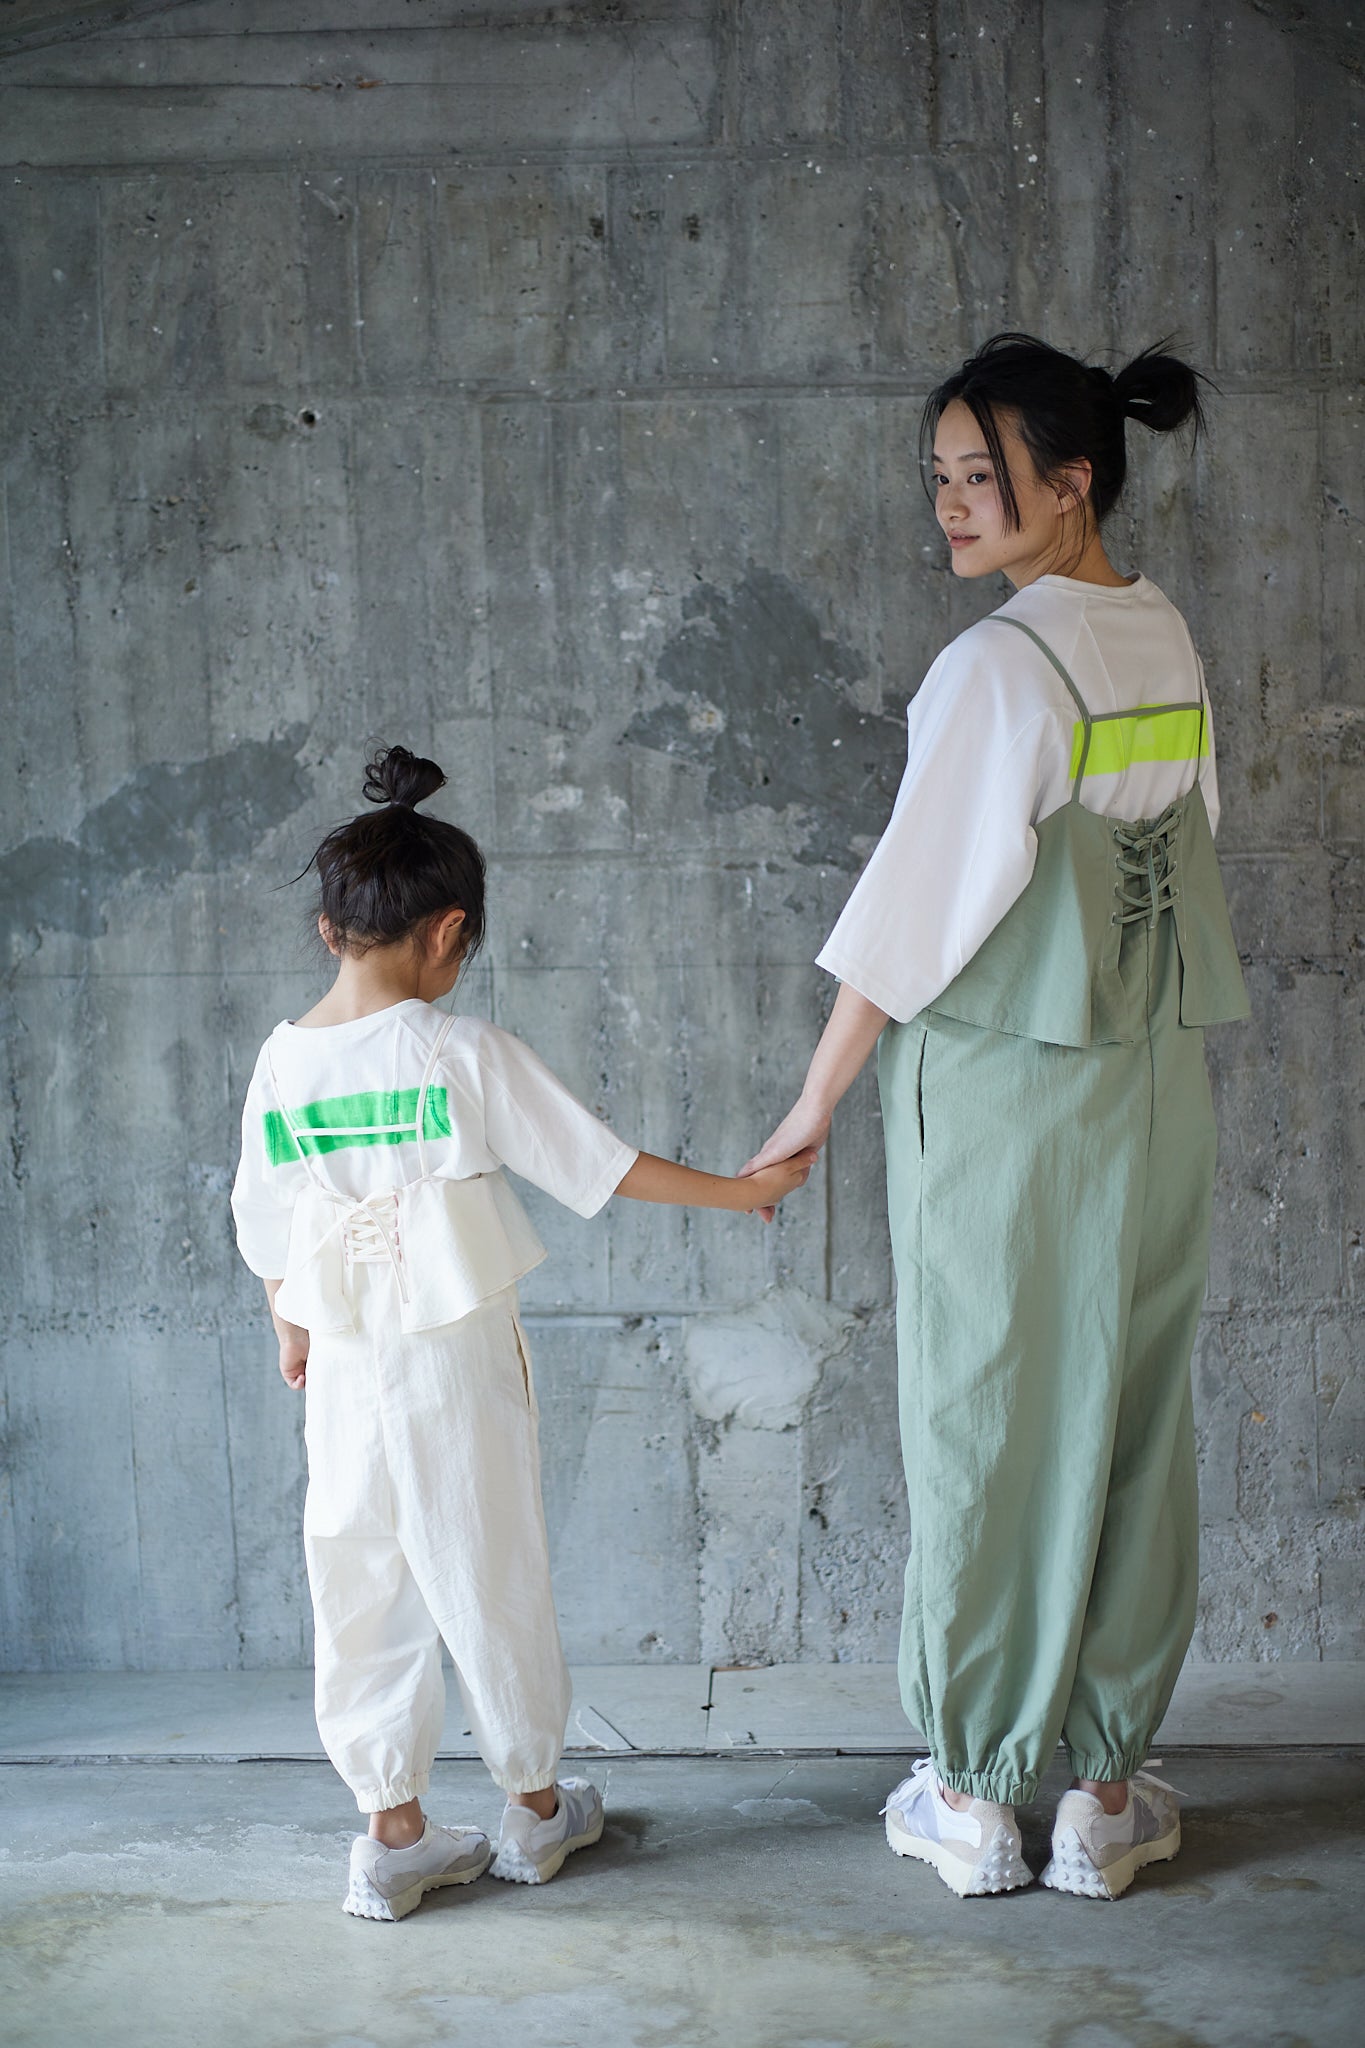 -KIDS- Water repellent pants dress / OFF-WHITE